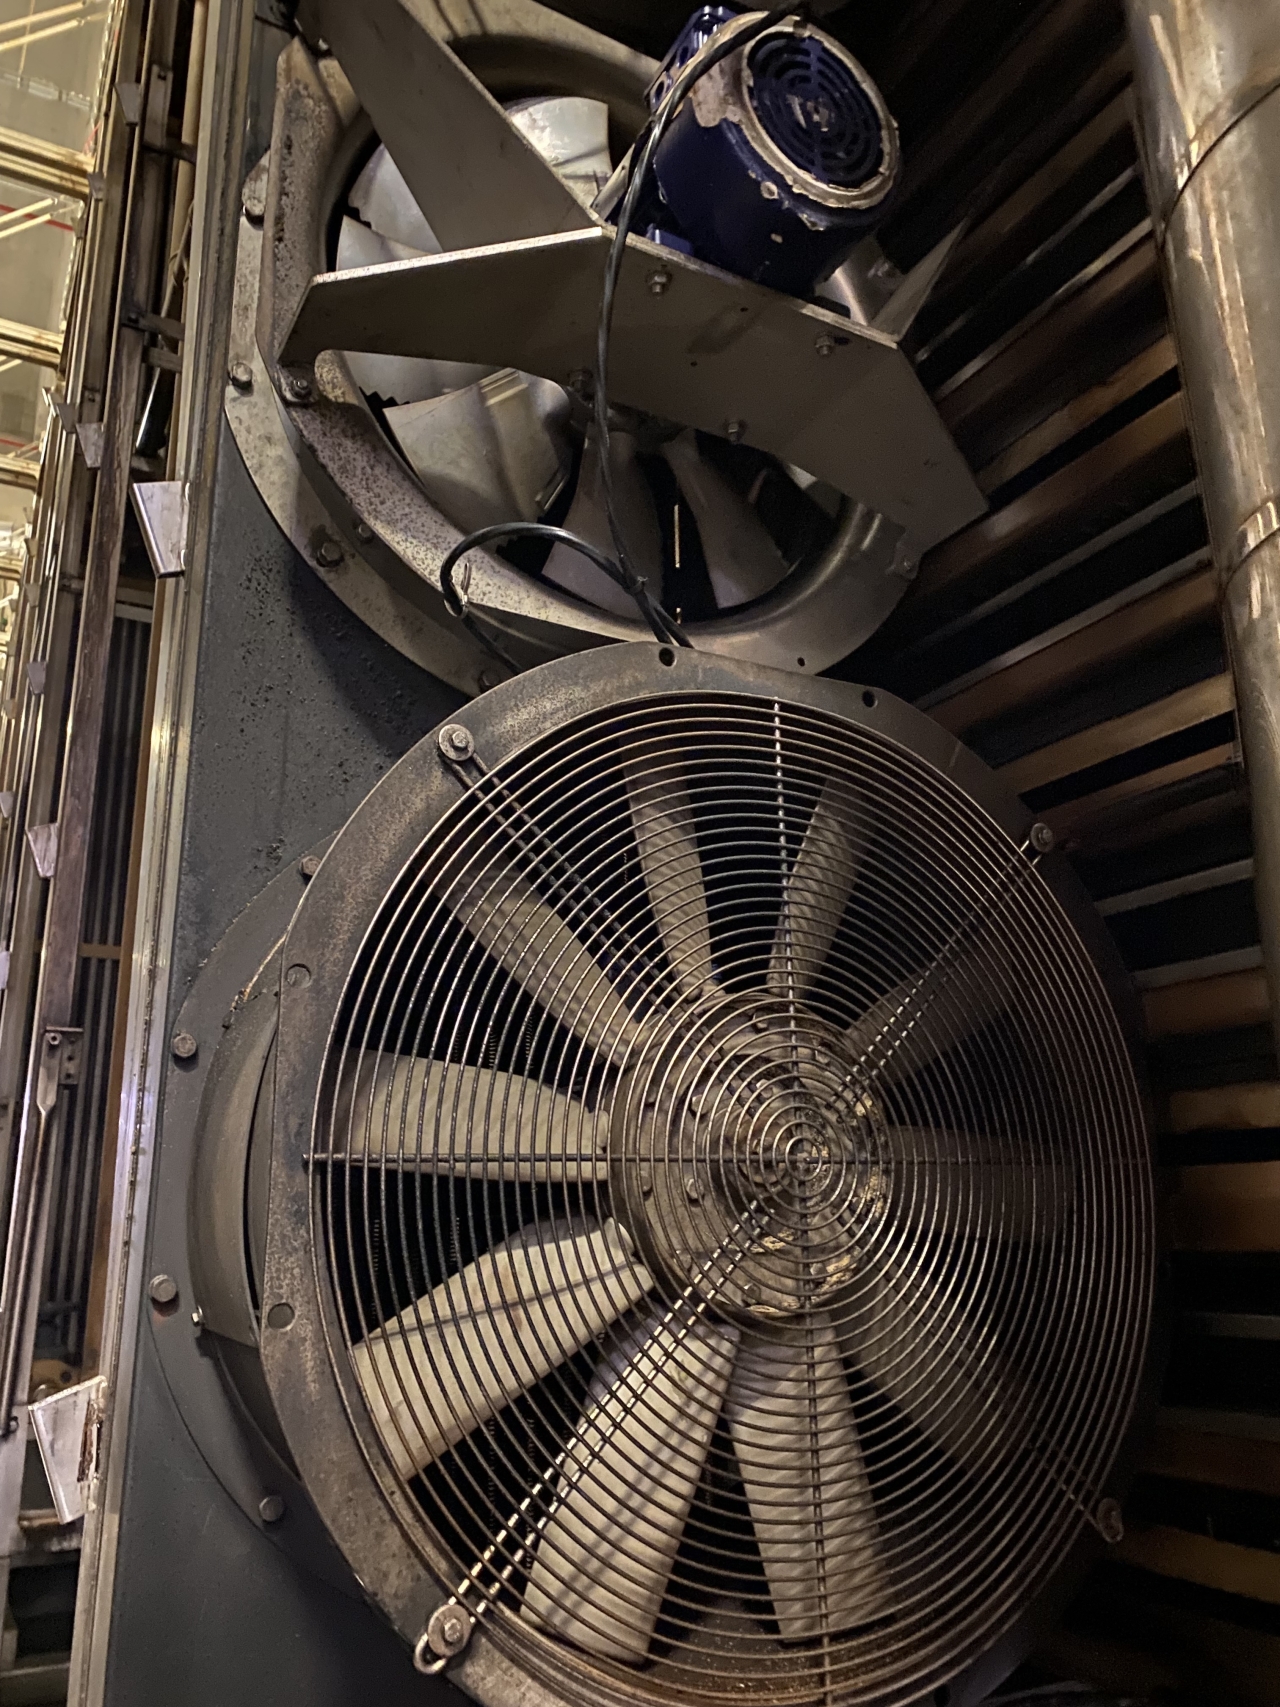 New energy efficient fans pictured at top; older version which is being replaced at bottom